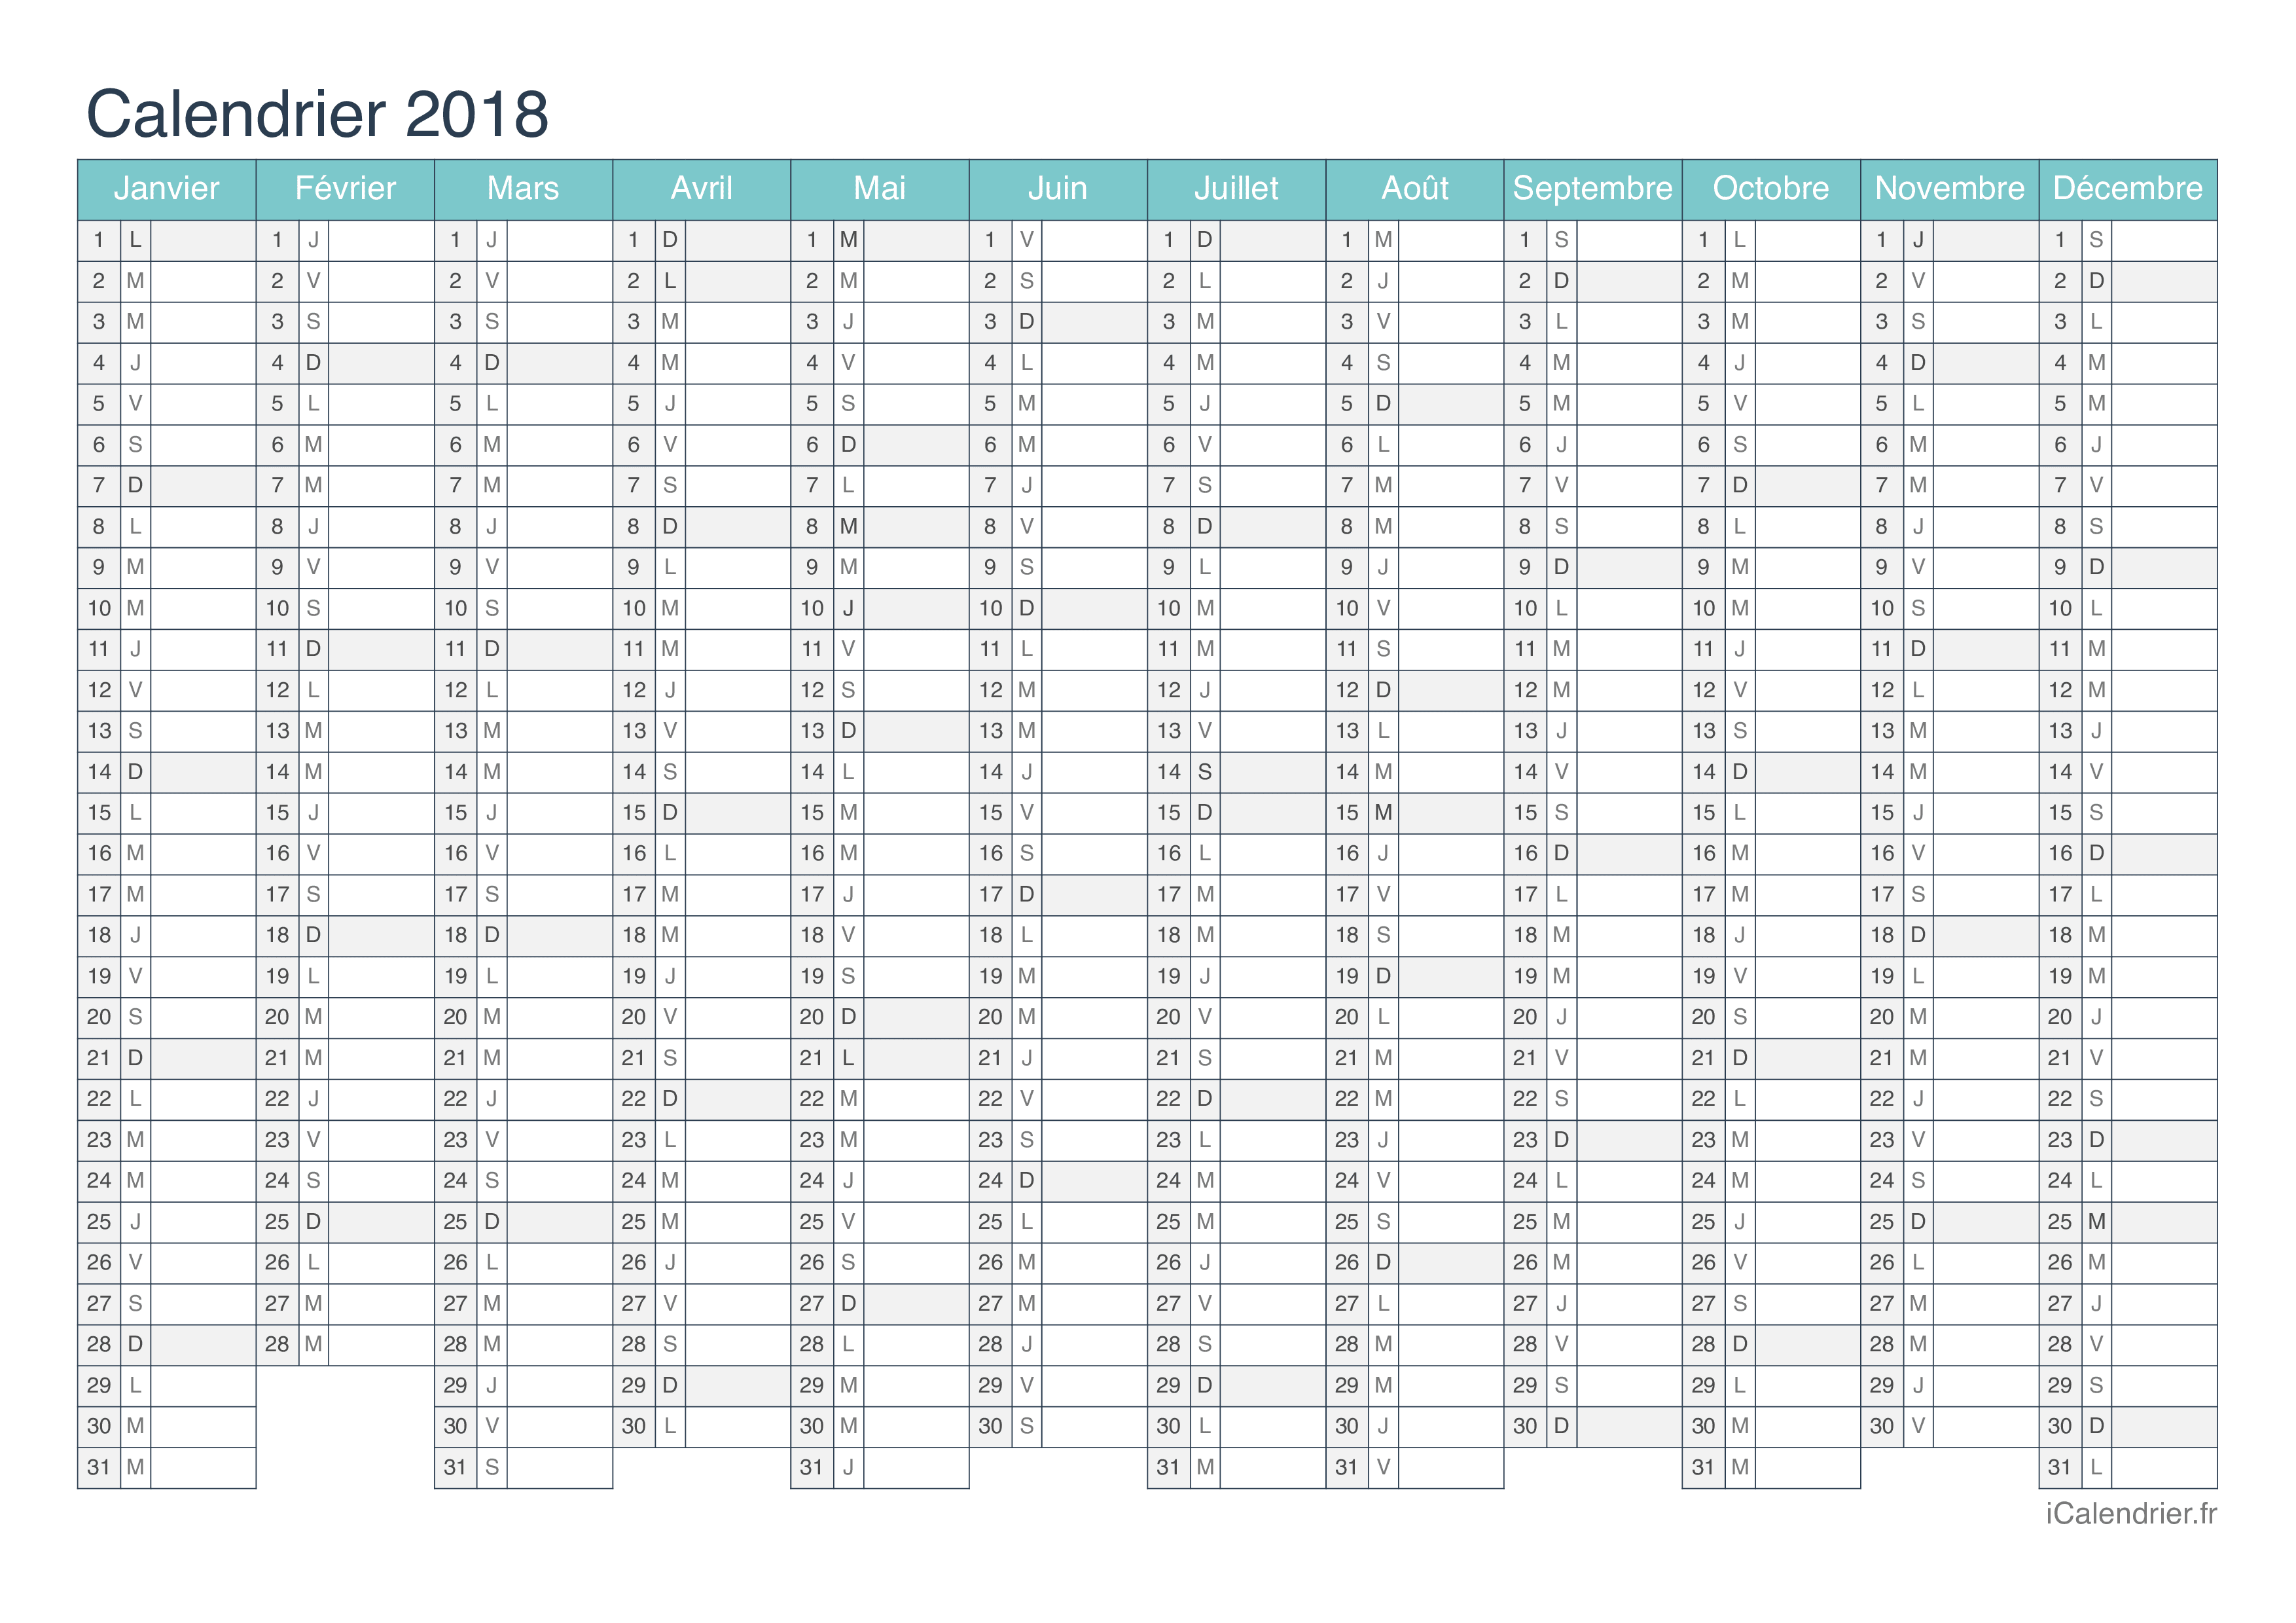 Calendrier 2018 - Turquoise